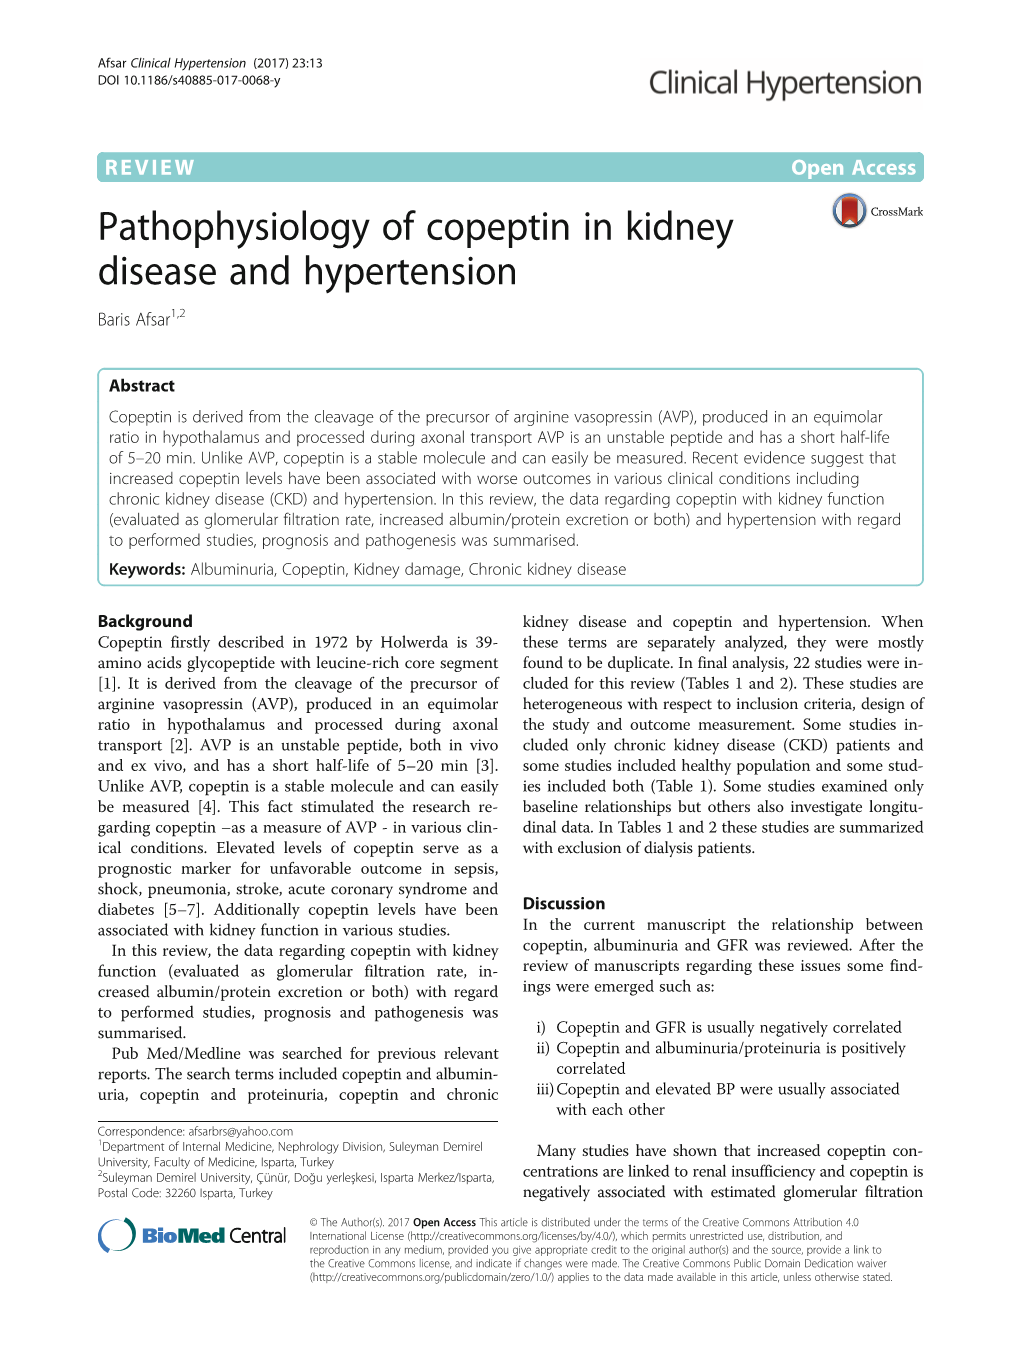 Pathophysiology of Copeptin in Kidney Disease and Hypertension Baris Afsar1,2